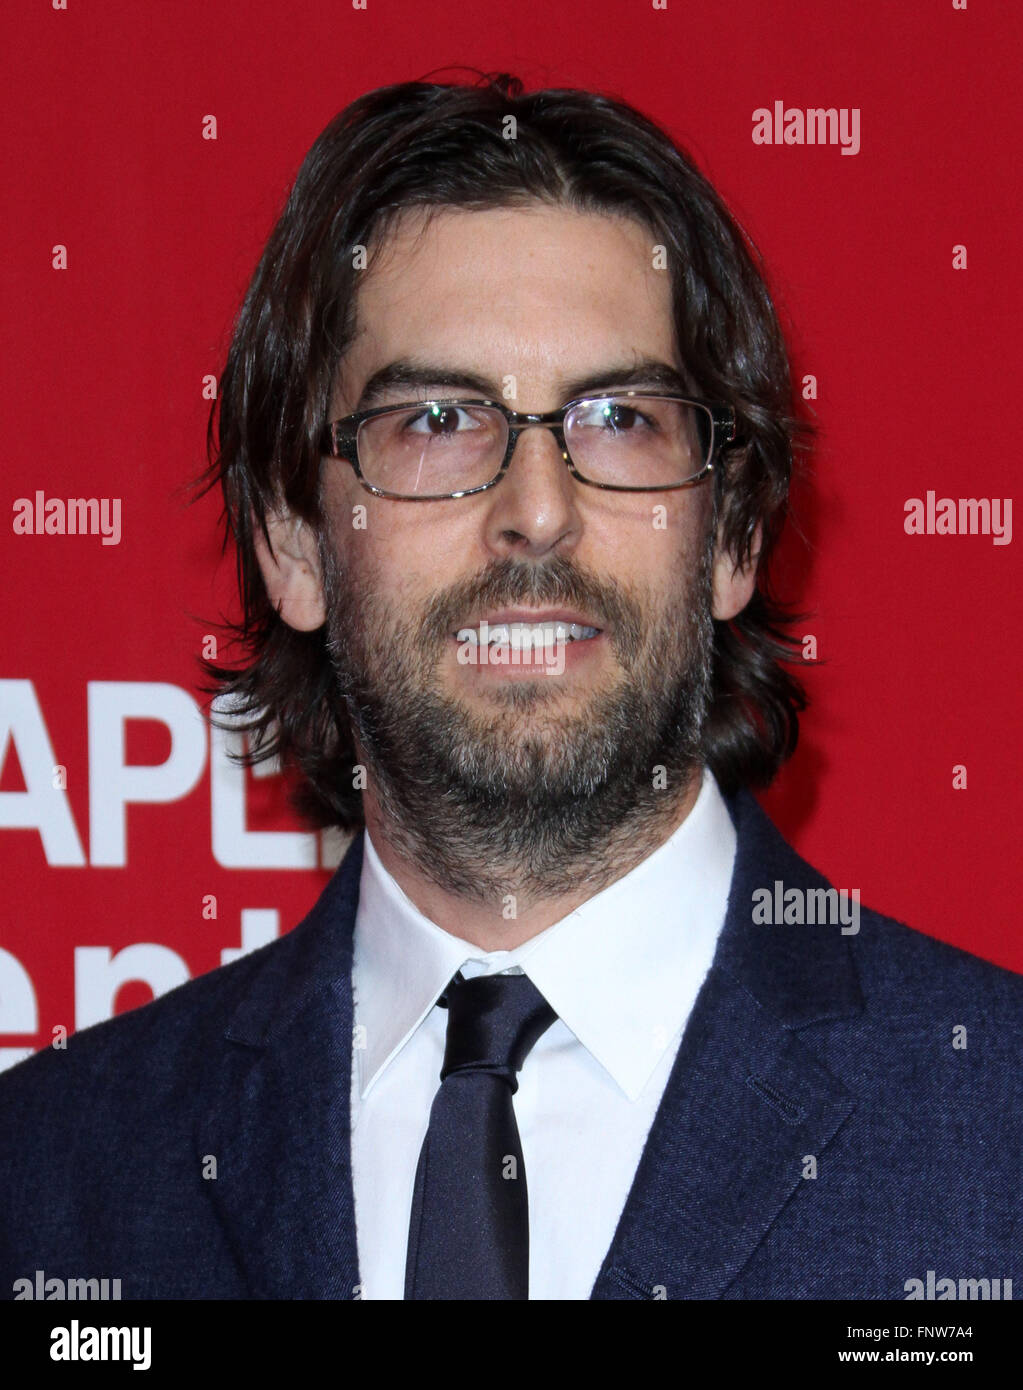 2016 MusiCares Person of the Year honoring Lionel Richie held at the Los Angeles Convention Center - Arrivals  Featuring: Rob Bourdon of Linking Park Where: Los Angeles, California, United States When: 13 Feb 2016 Stock Photo